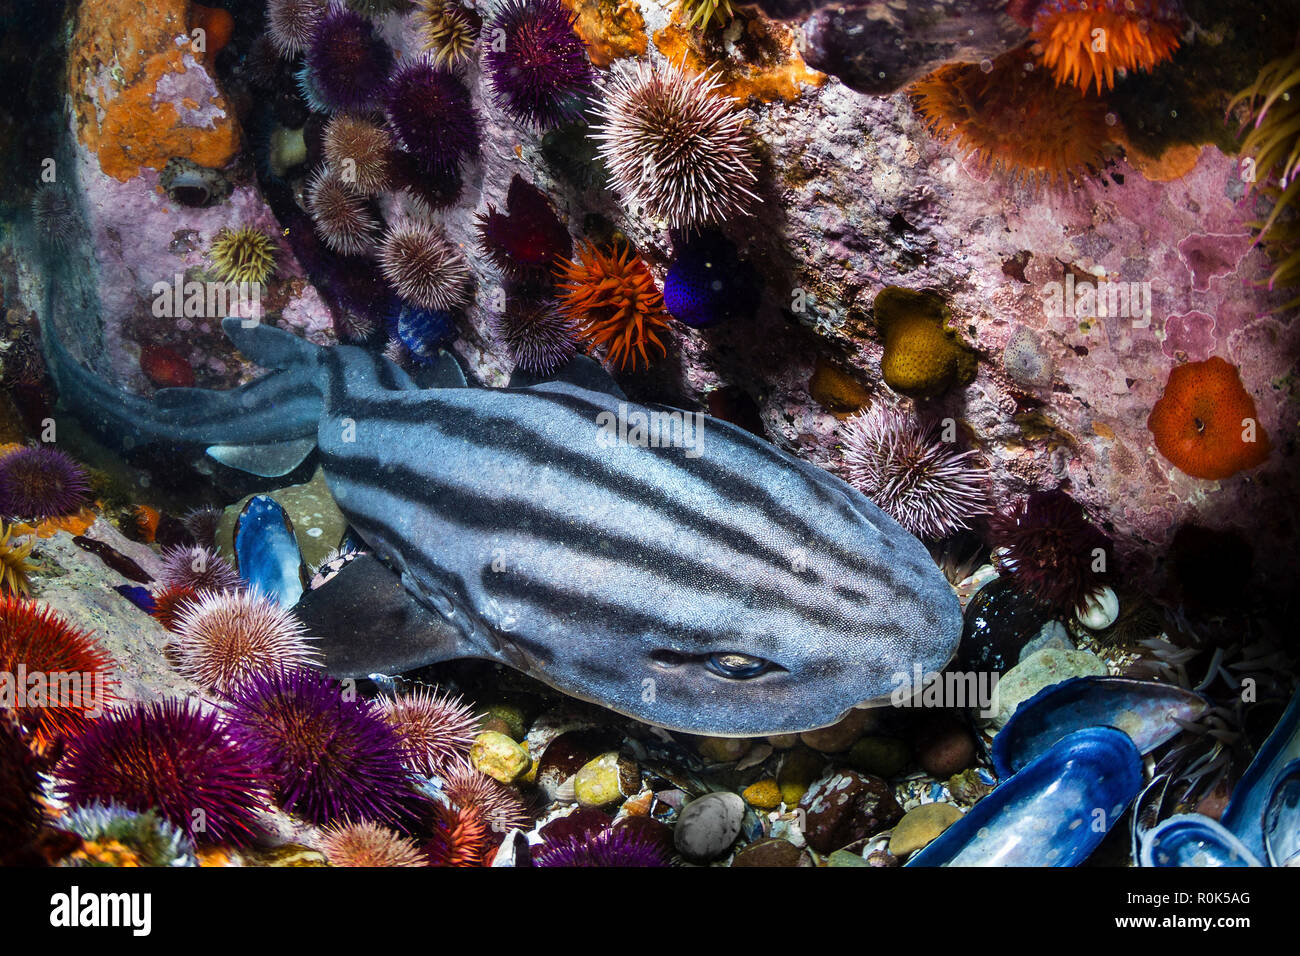 Pyjama shark resting in a little canyon between sea urchins, South Africa. Stock Photo